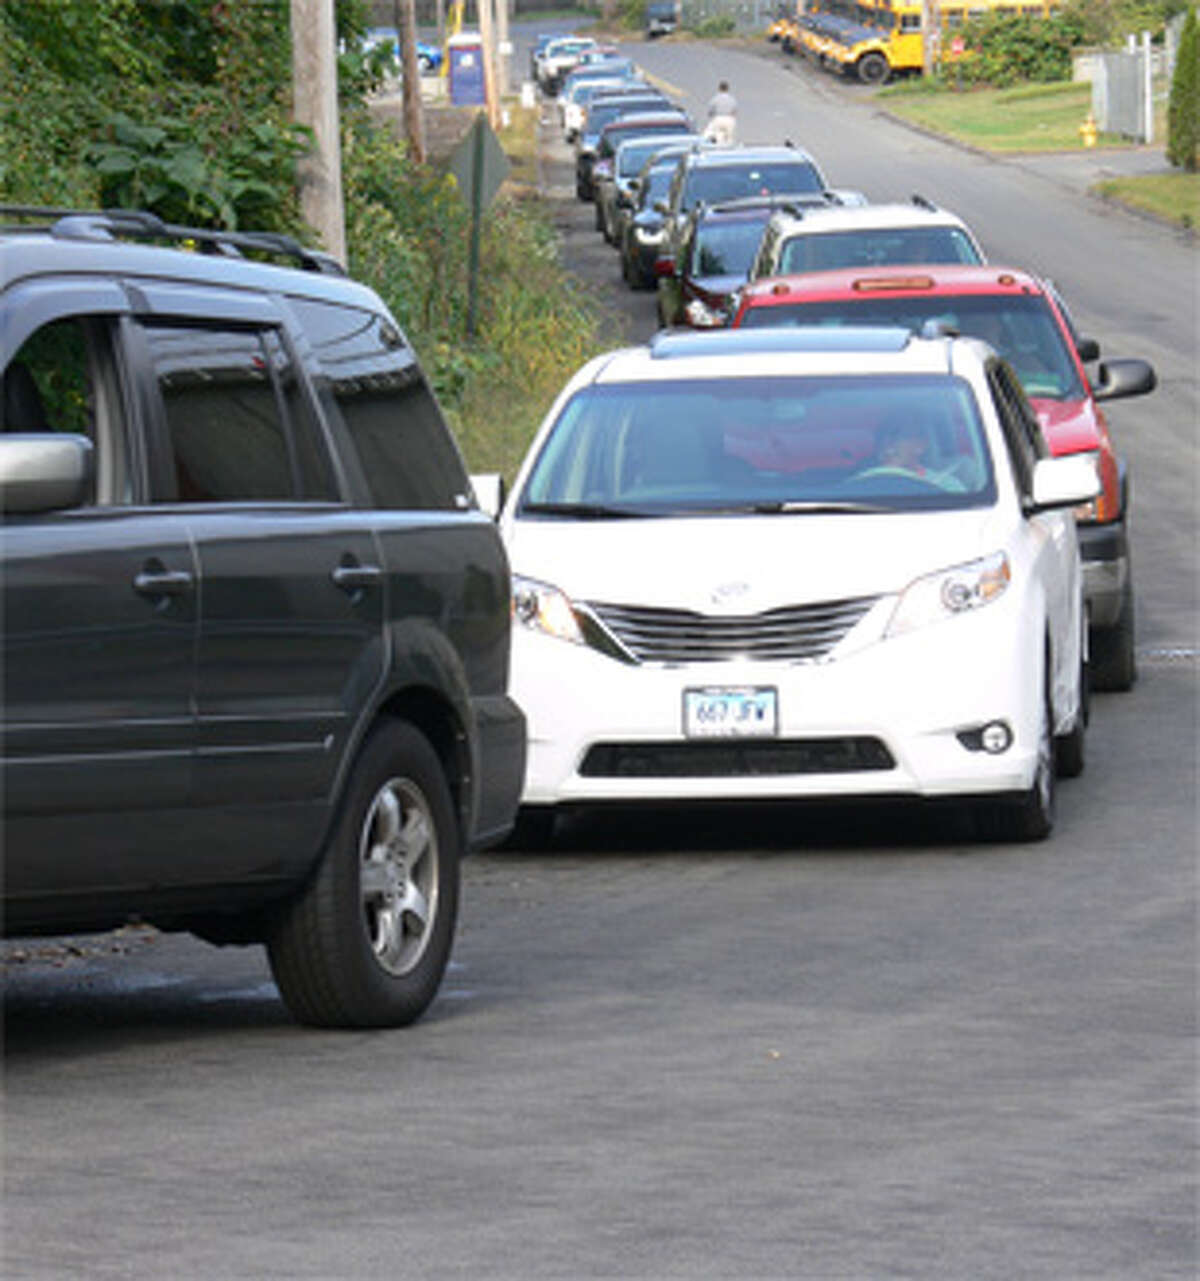 Vehicles line up on Riverdale Avenue as drivers wait to drop off items during the annual collection on Oct. 5.